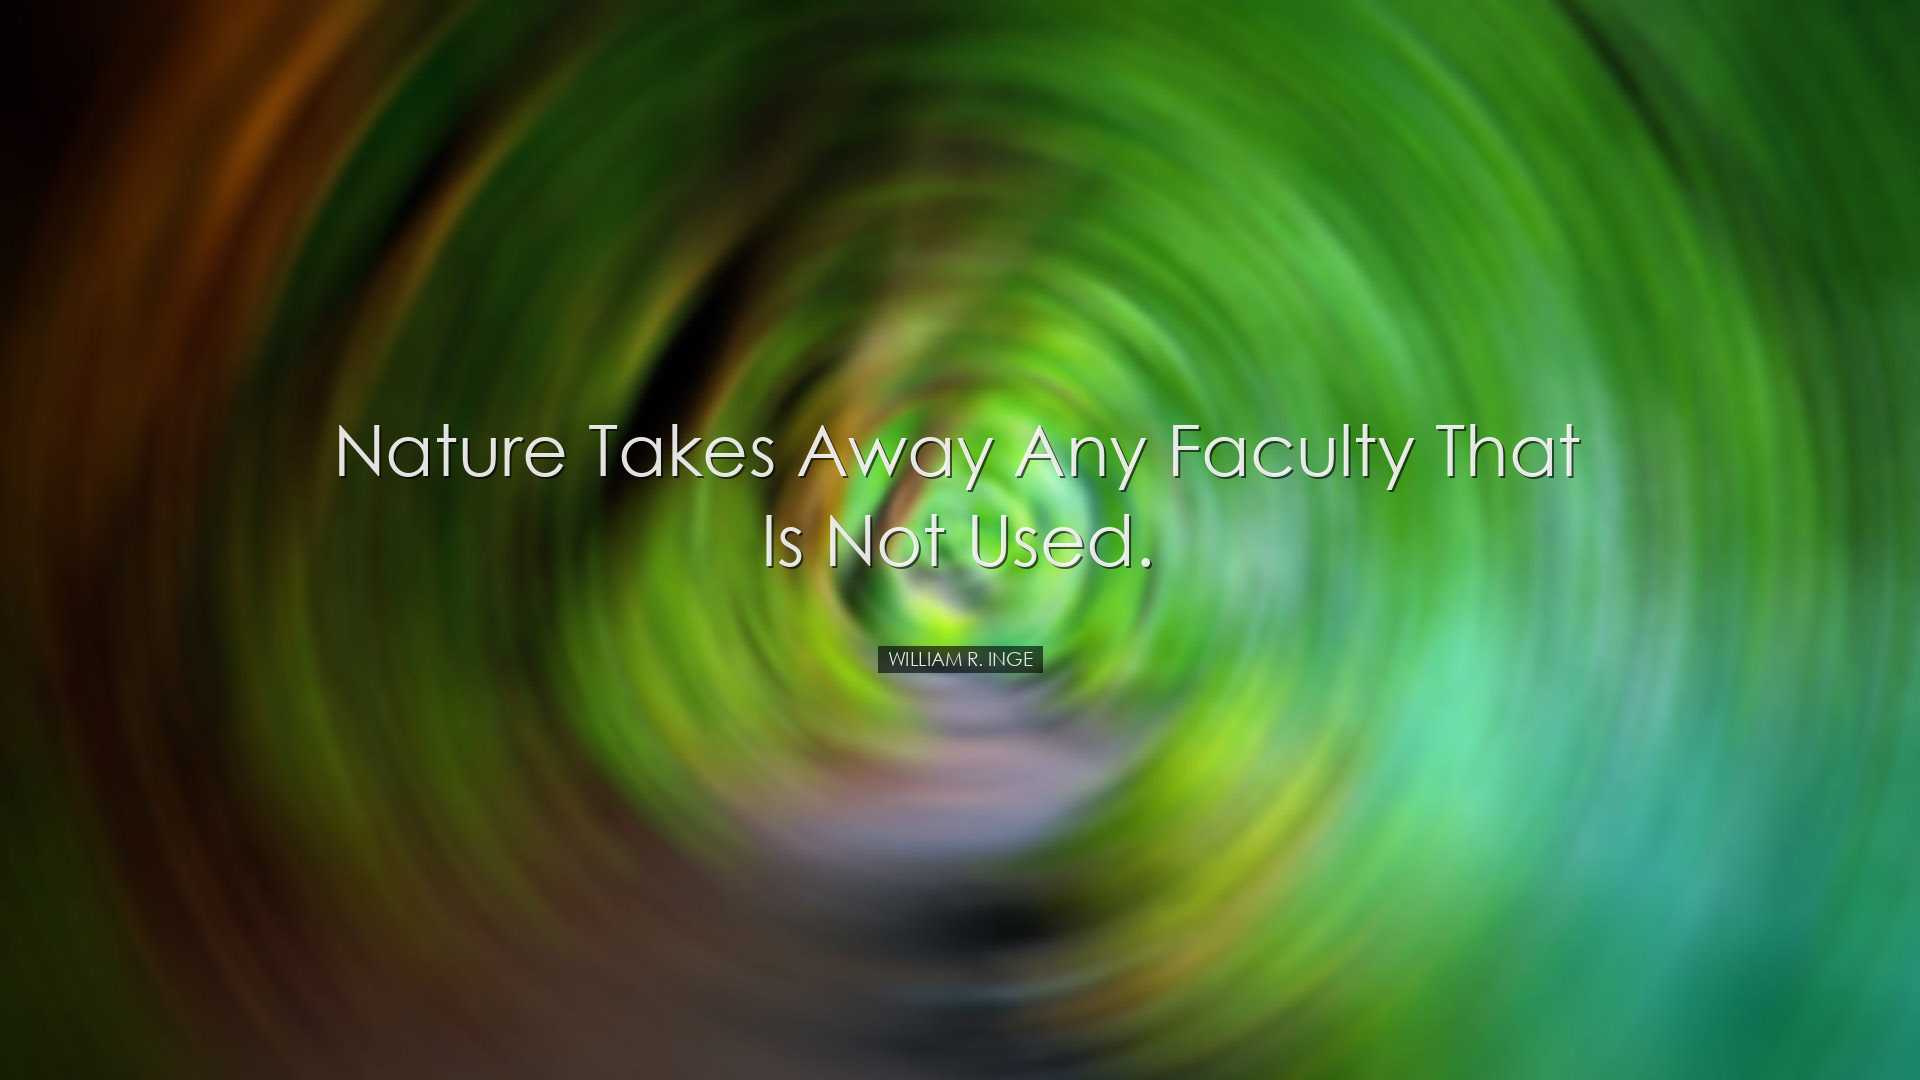 Nature takes away any faculty that is not used. - William R. Inge